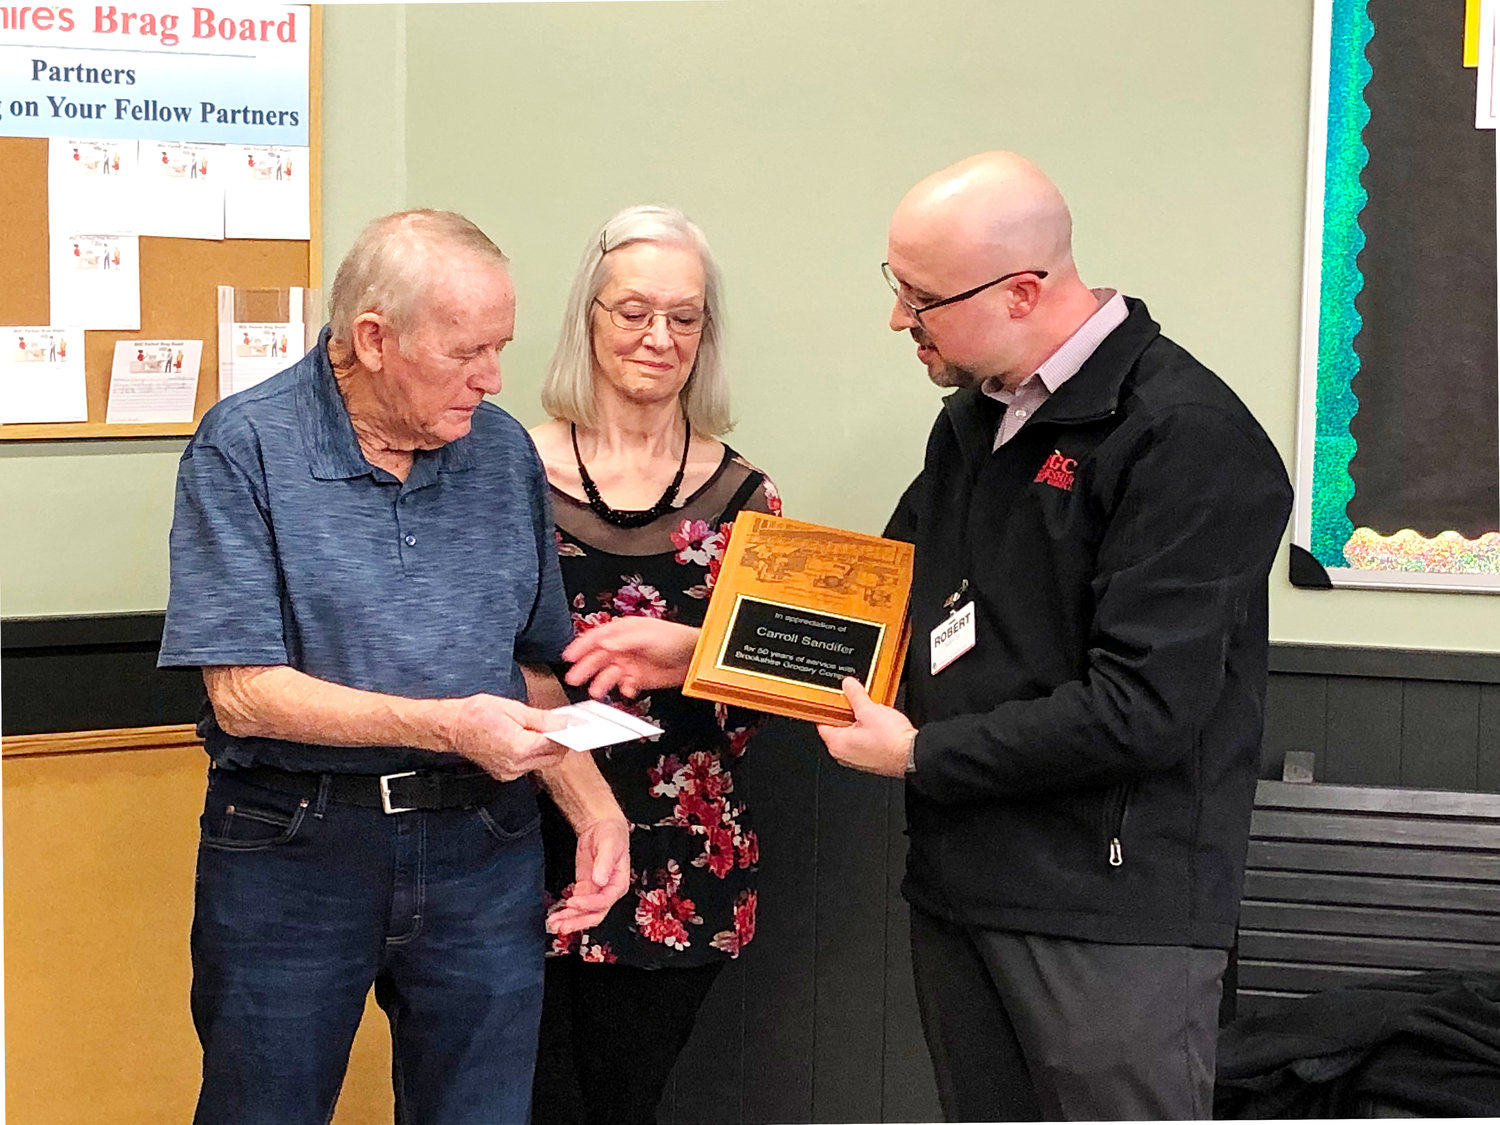 Store manager Robert Marta presented Carroll Wayne Sandifer a plaque and gift for his retirement from Brookshire’s Grocery Store after 50 years as an employee. “We wish you the best in this stage of life,” Marta said. (Monitor photo by Amanda Duncan)